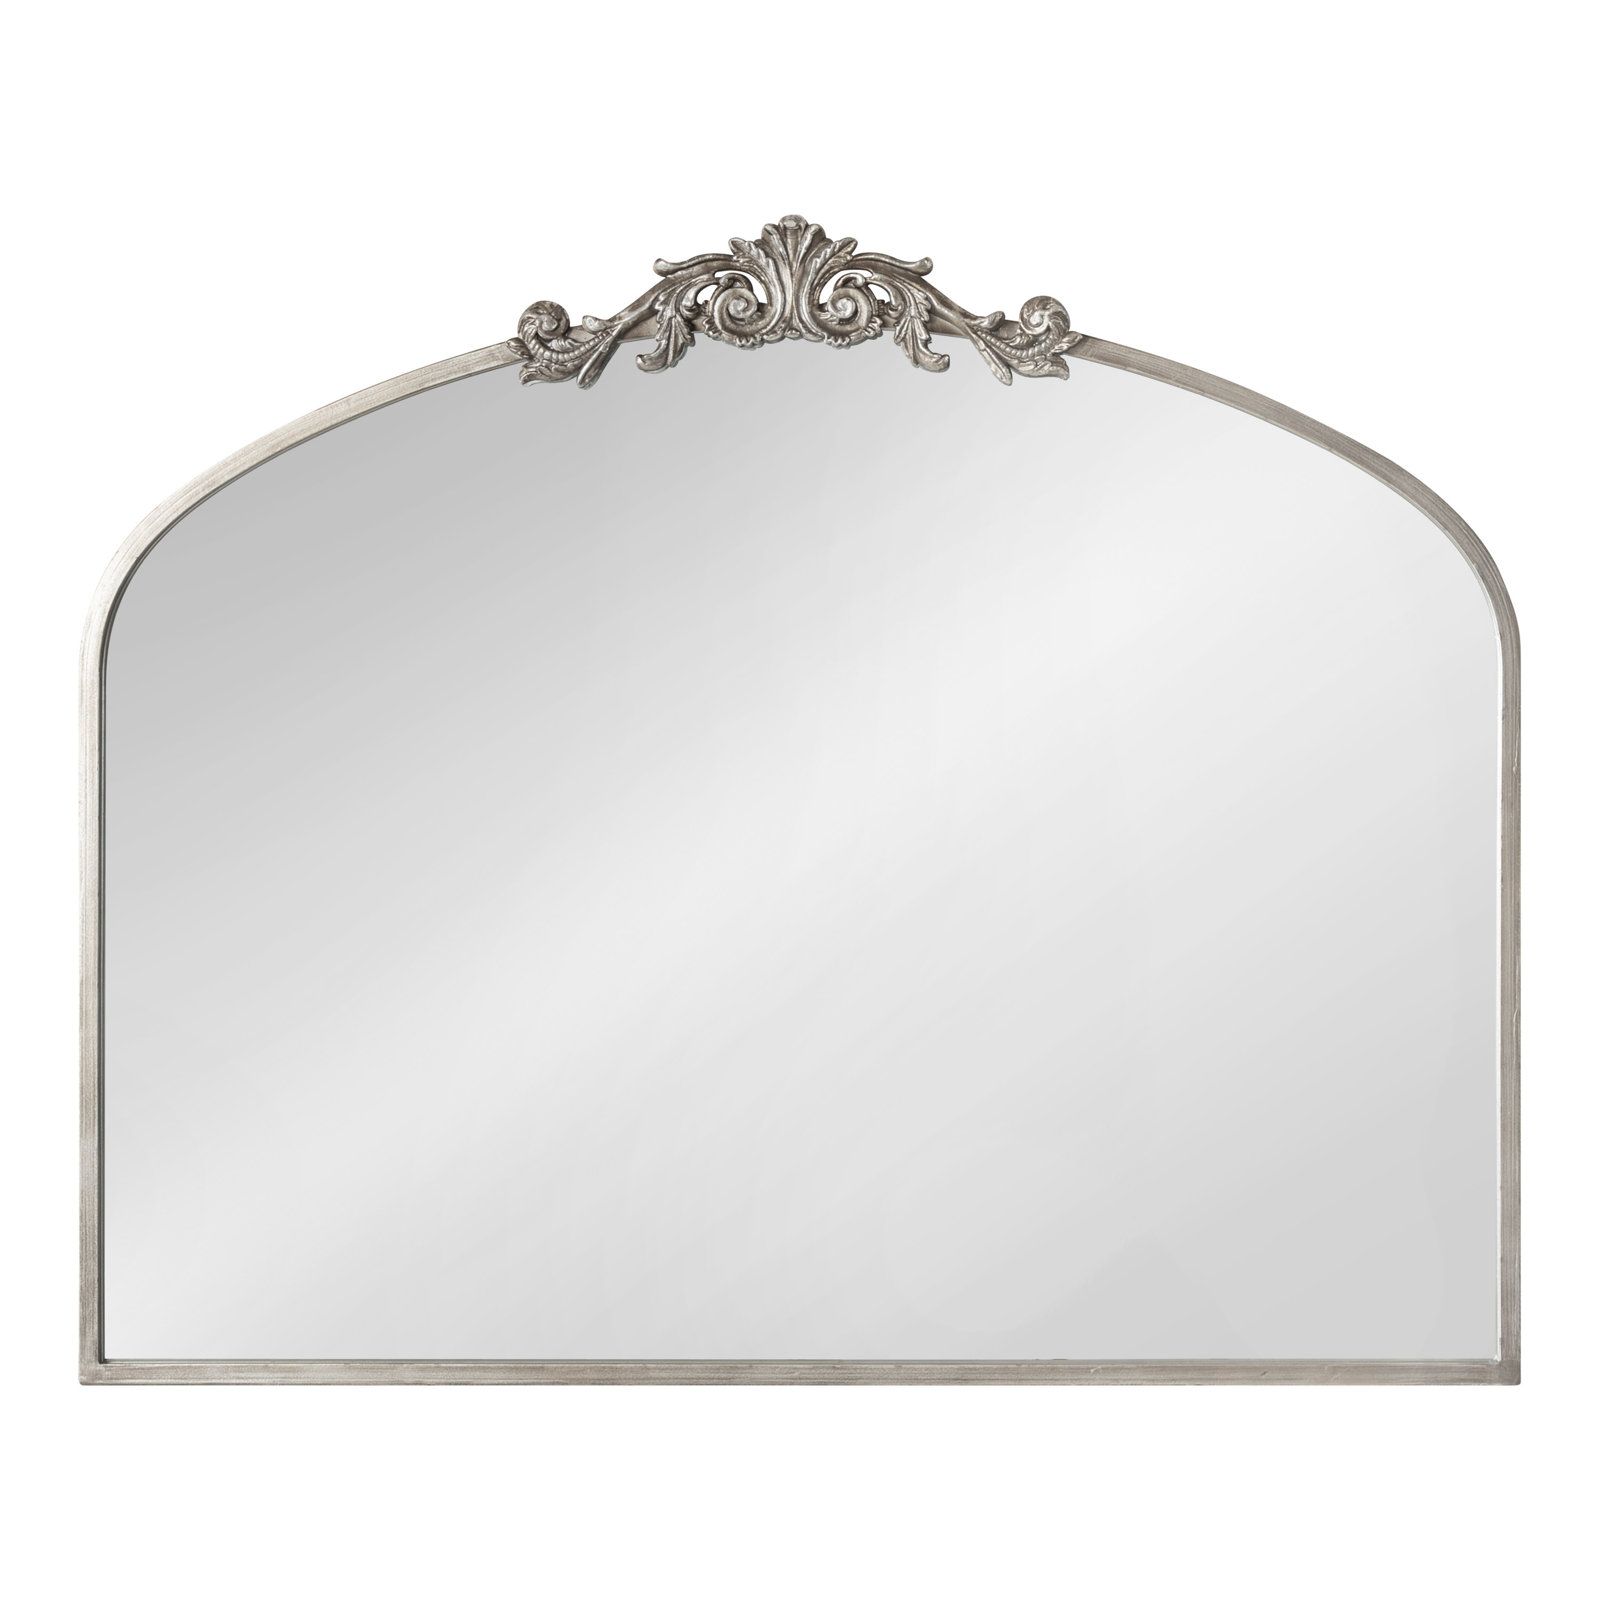 31" x 19" Anglo Arch Mirror  - Silver